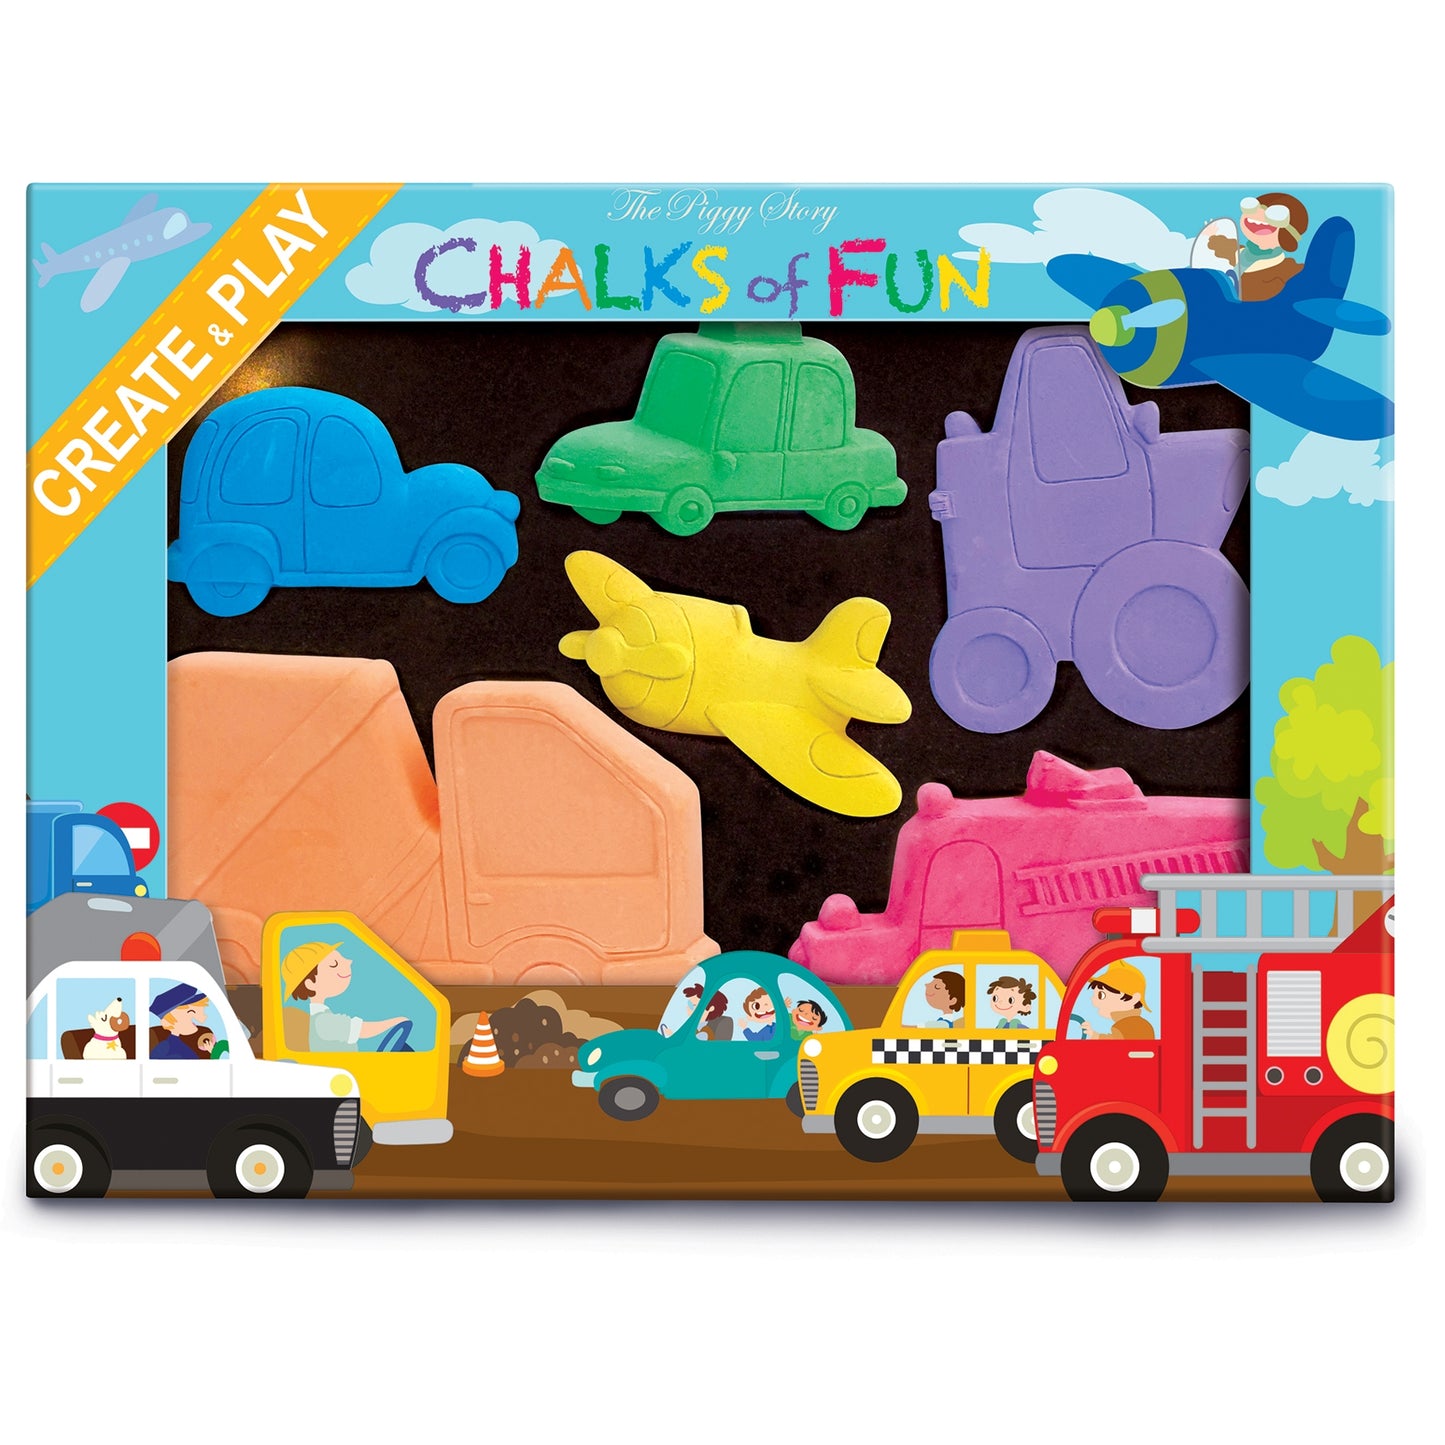 Chalks of Fun - Crazy Car Town Toys The Piggy Story   